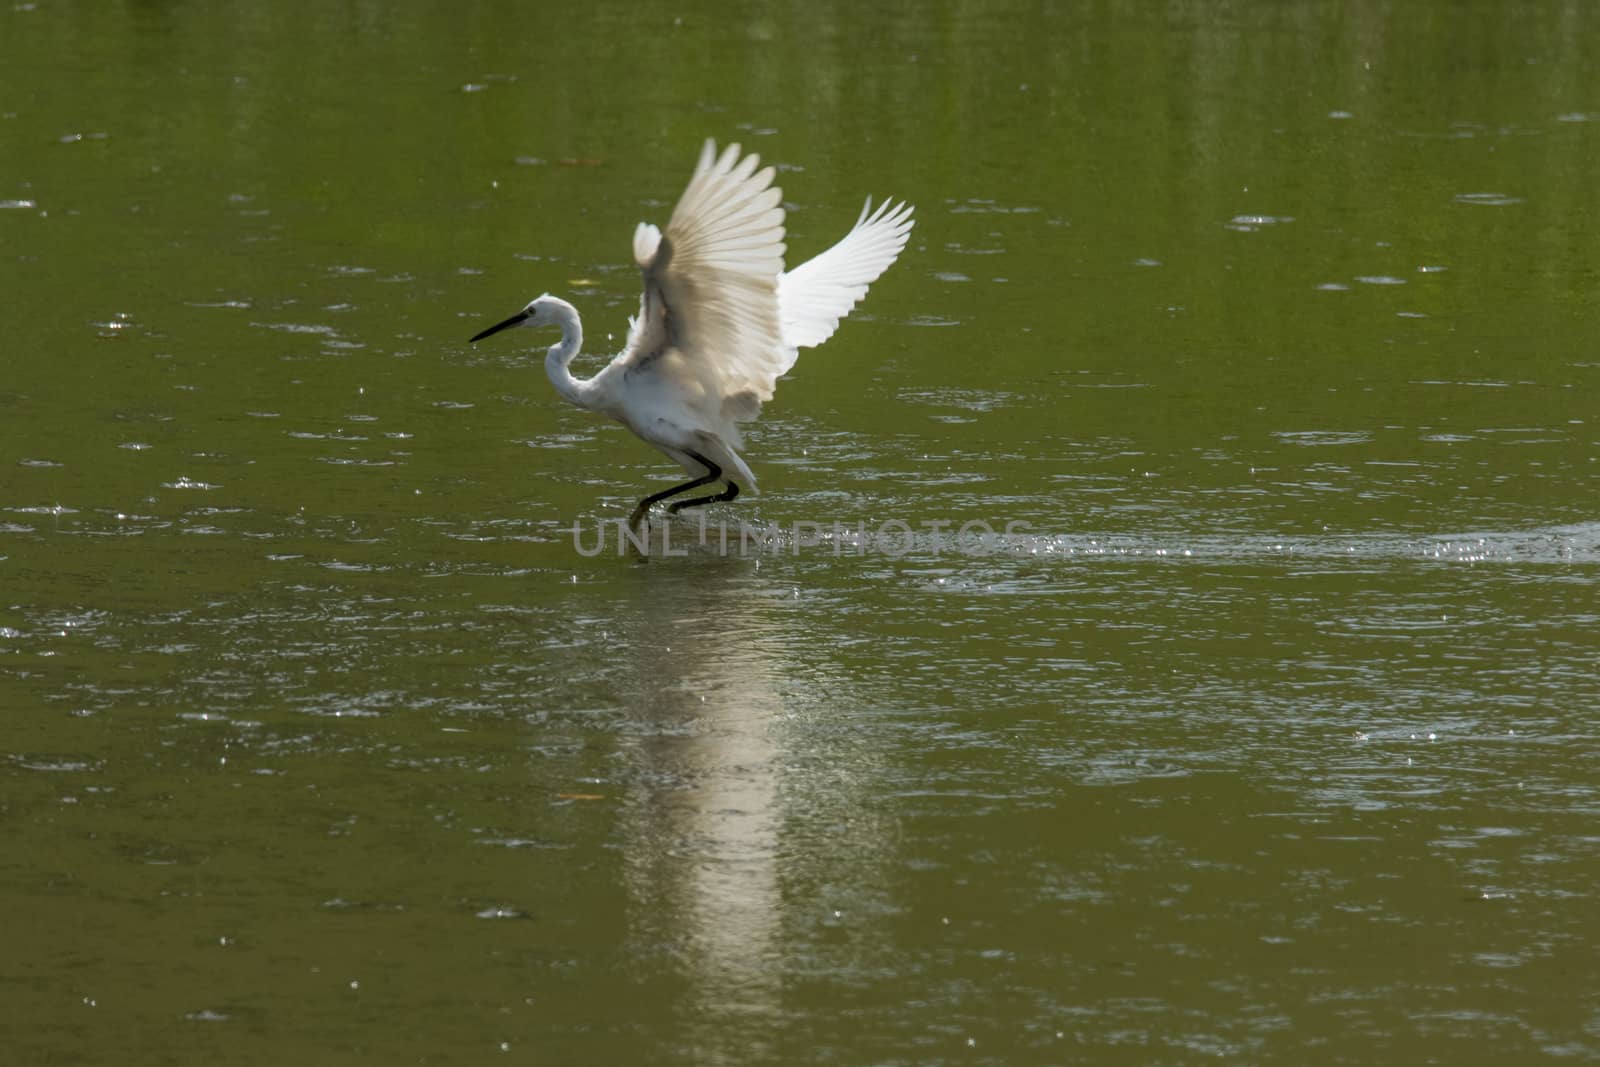 Little egret  trying to land on the muddy green water